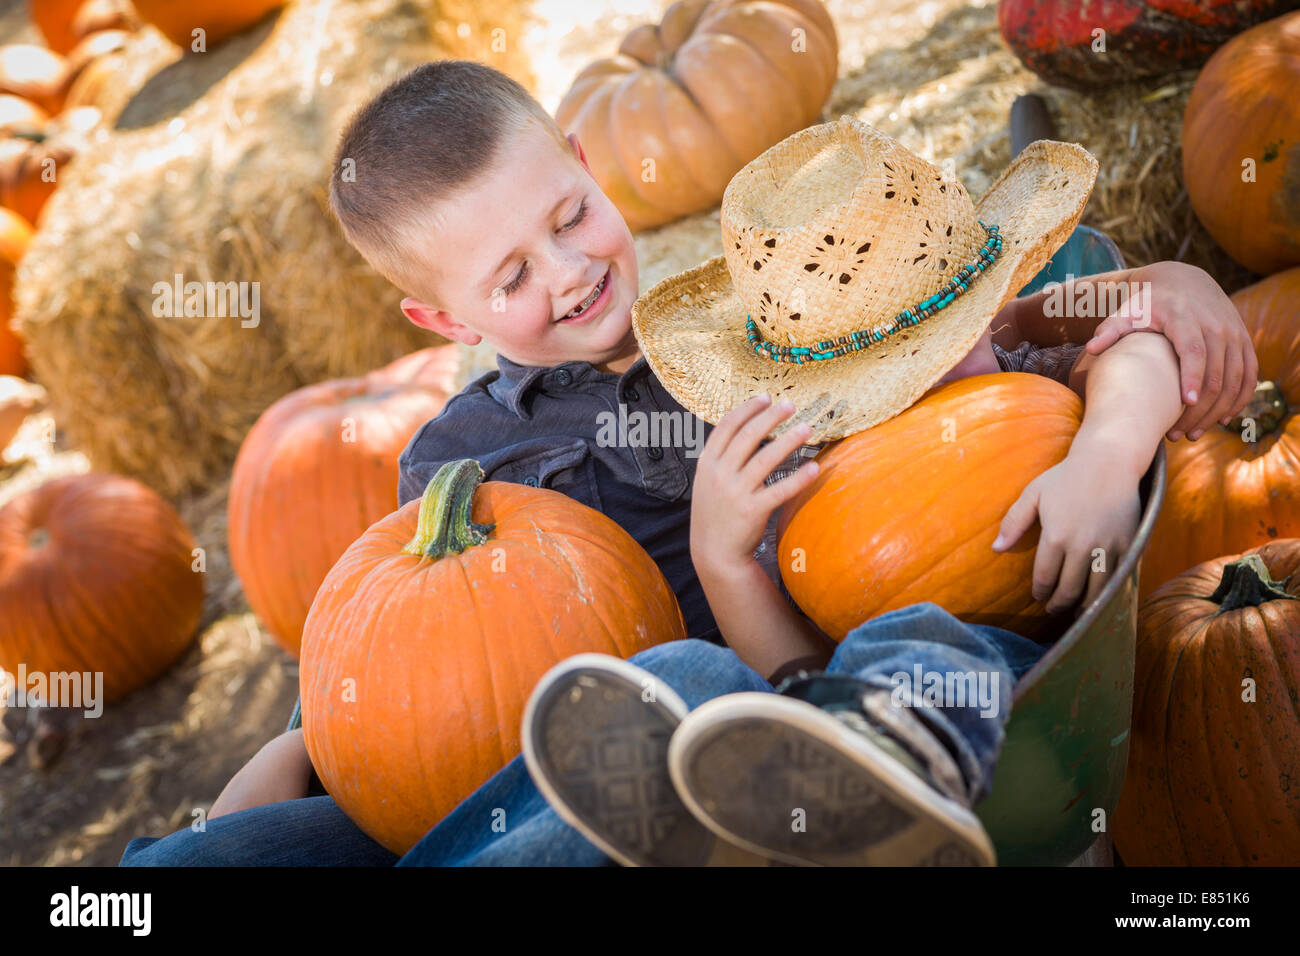 Two Little Boys Playing in Wheelbarrow at the Pumpkin Patch in a Rustic Country Setting. Stock Photo